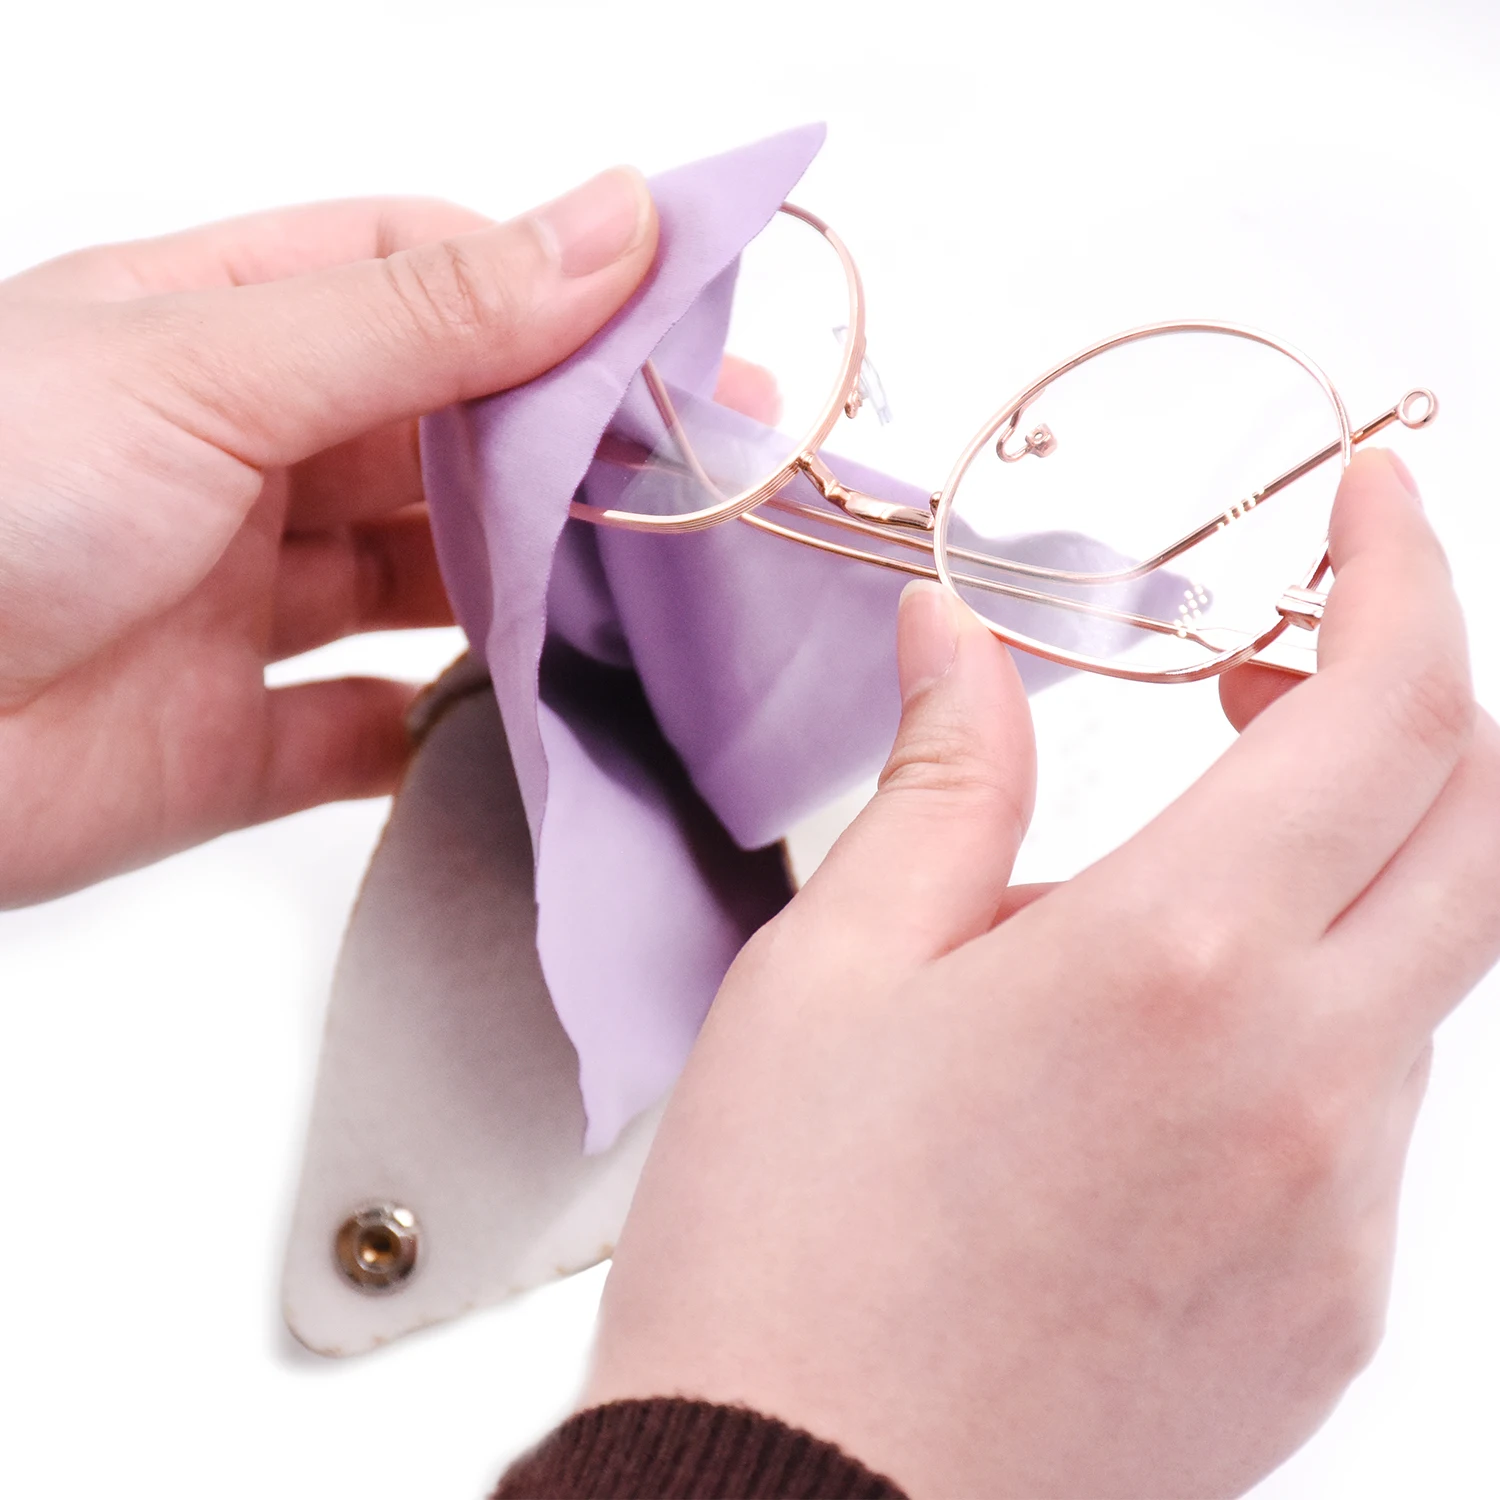 Are you still worried about dirt on your glasses? Try this cleaning cloth!